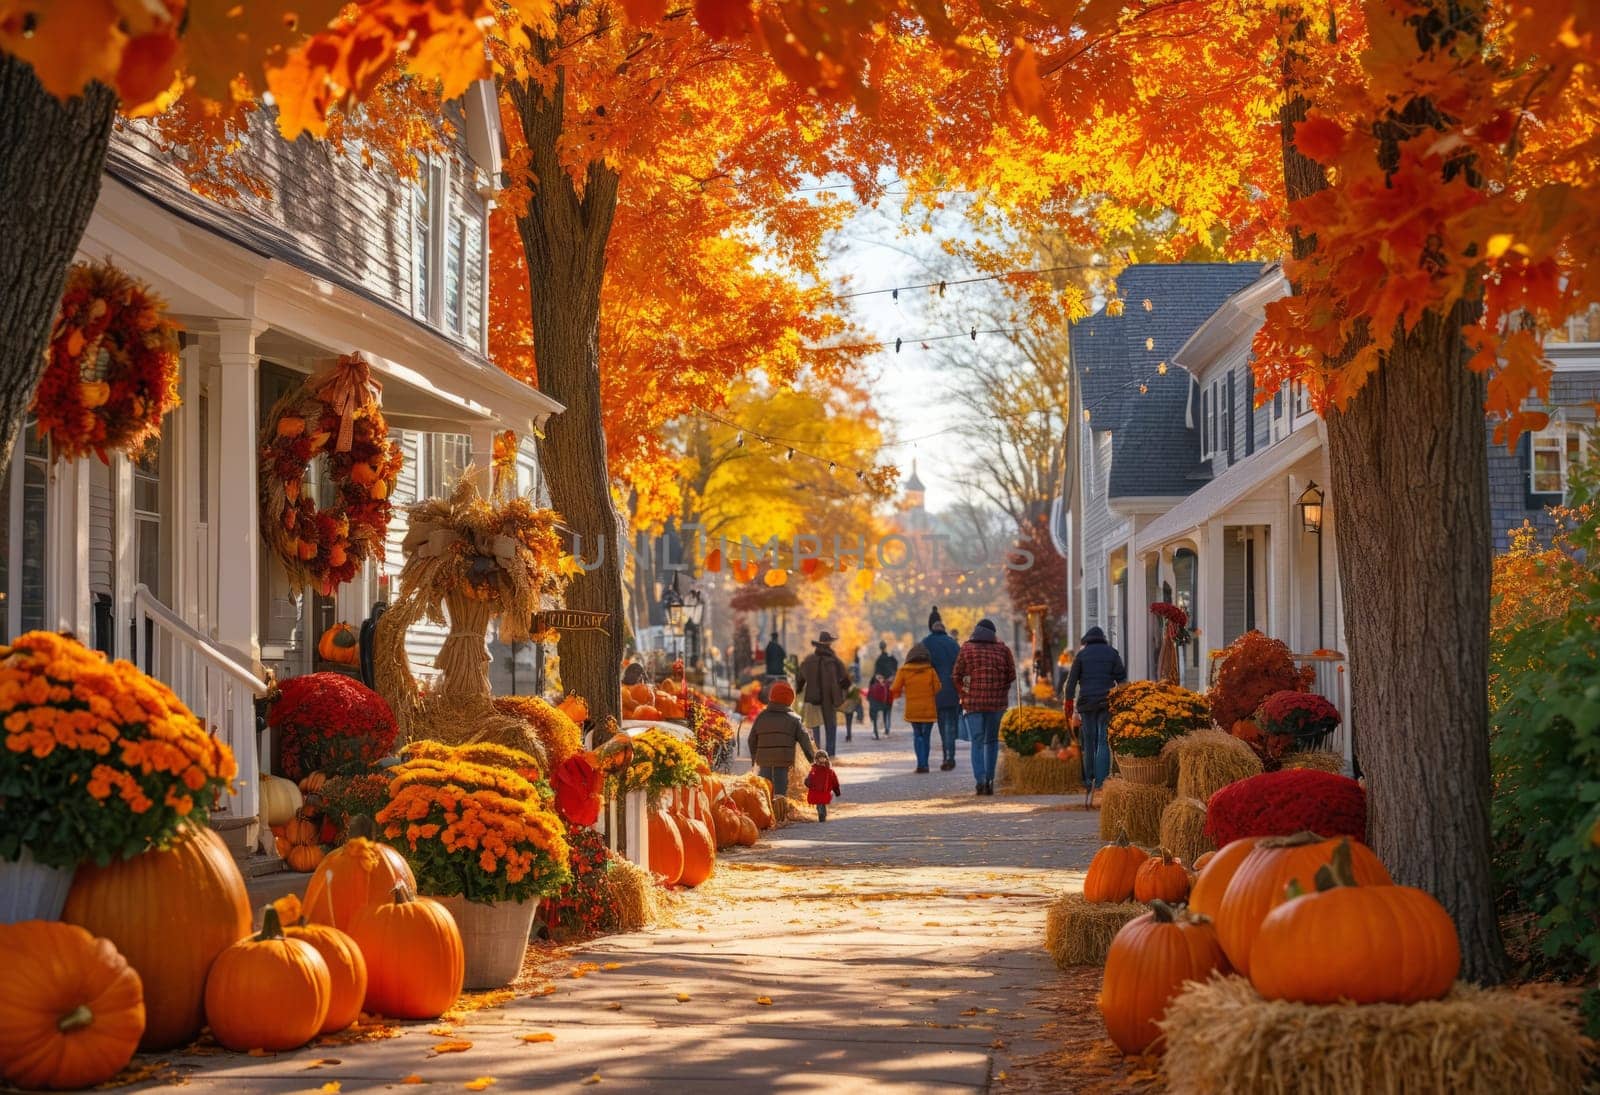 Enchanting rural town adorned with autumn-themed decorations